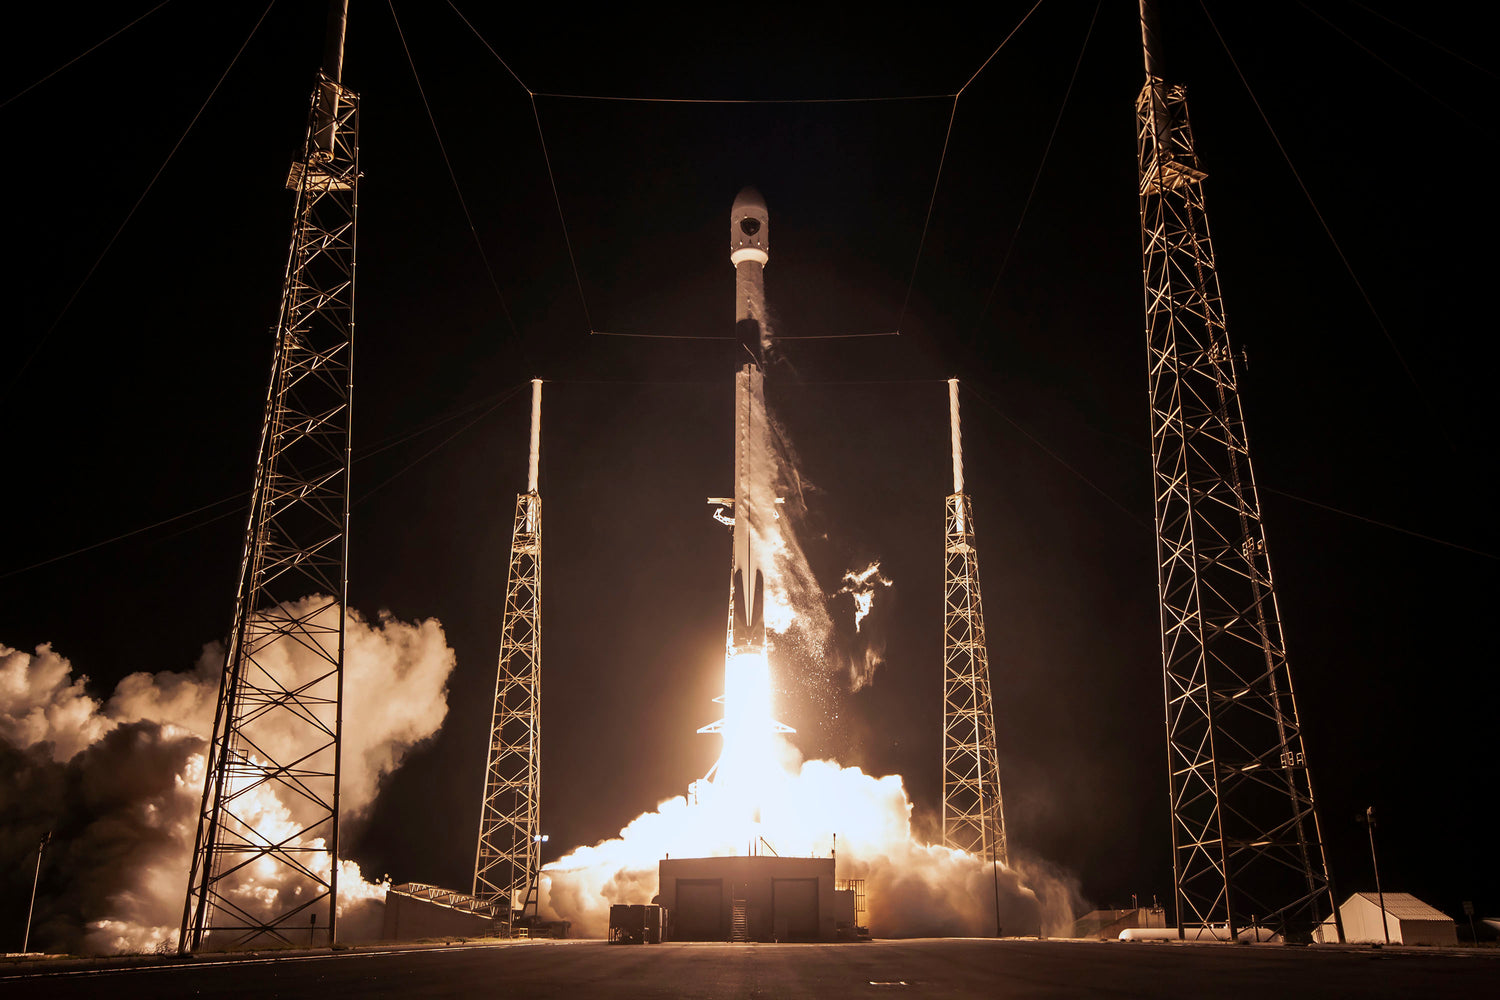 SpaceX will use previously-flown Falcon 9 rockets for U.S. Space Force National Security Missions